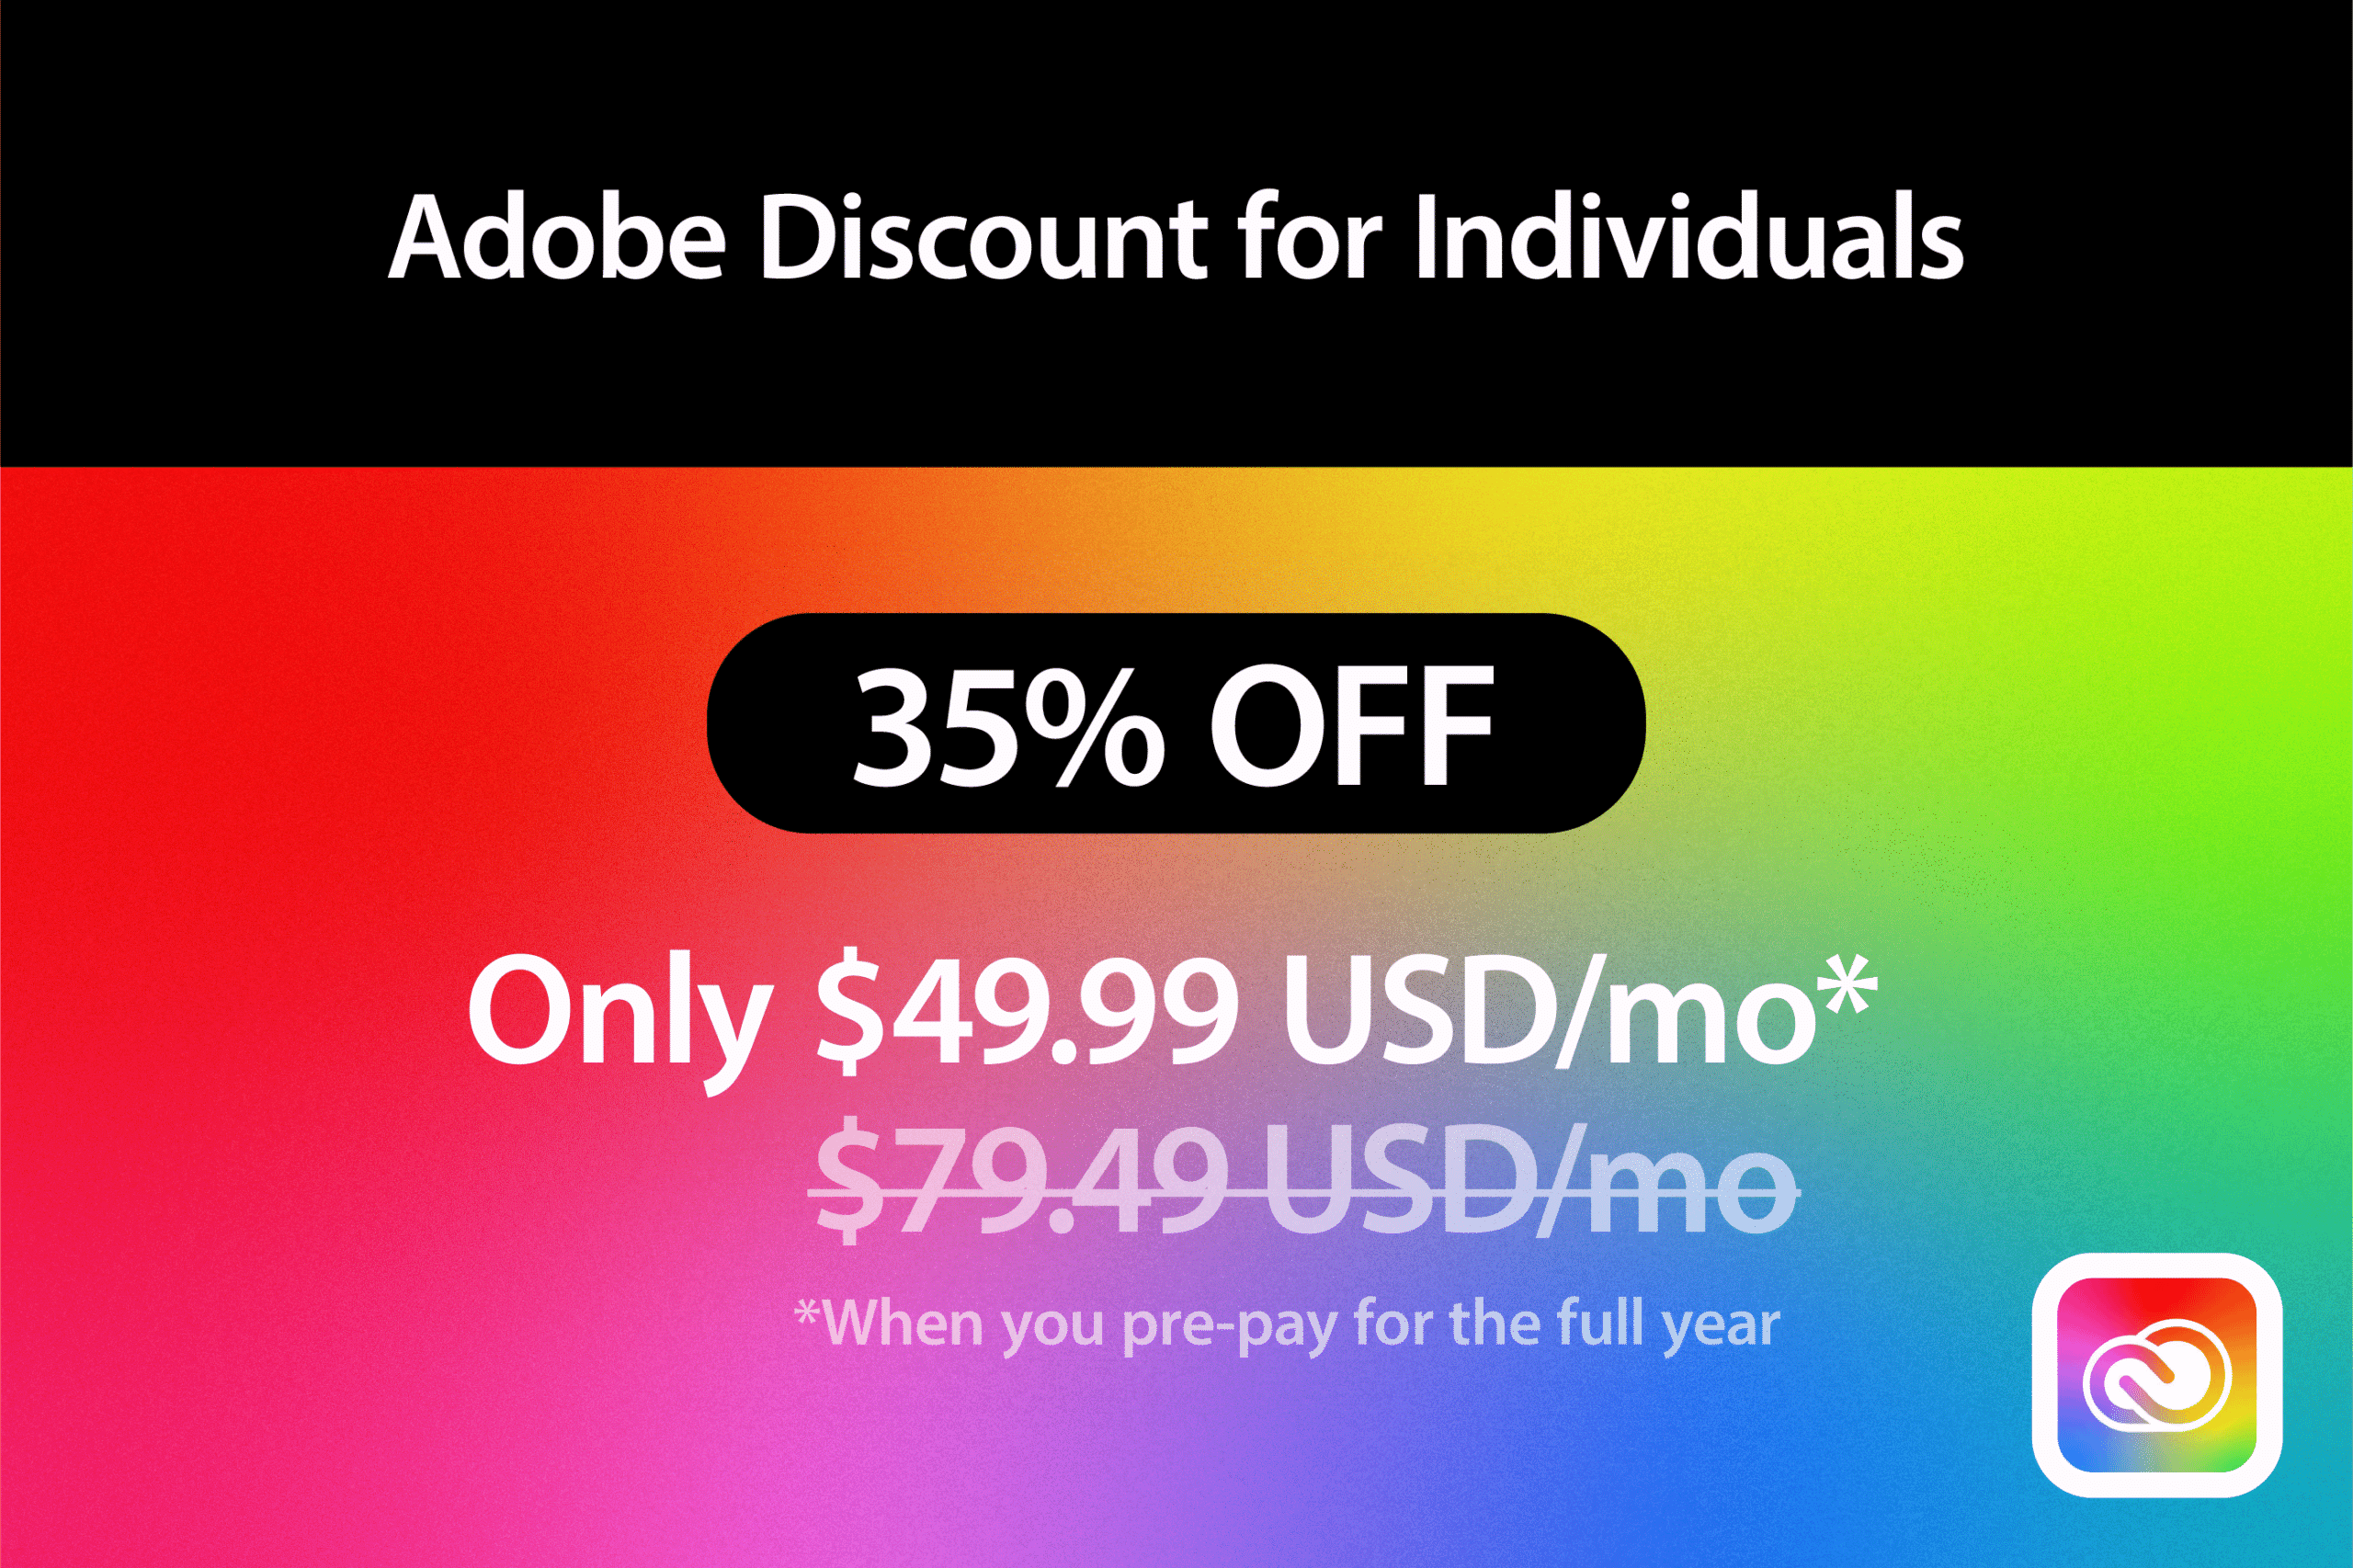 Adobe Discount for Individuals